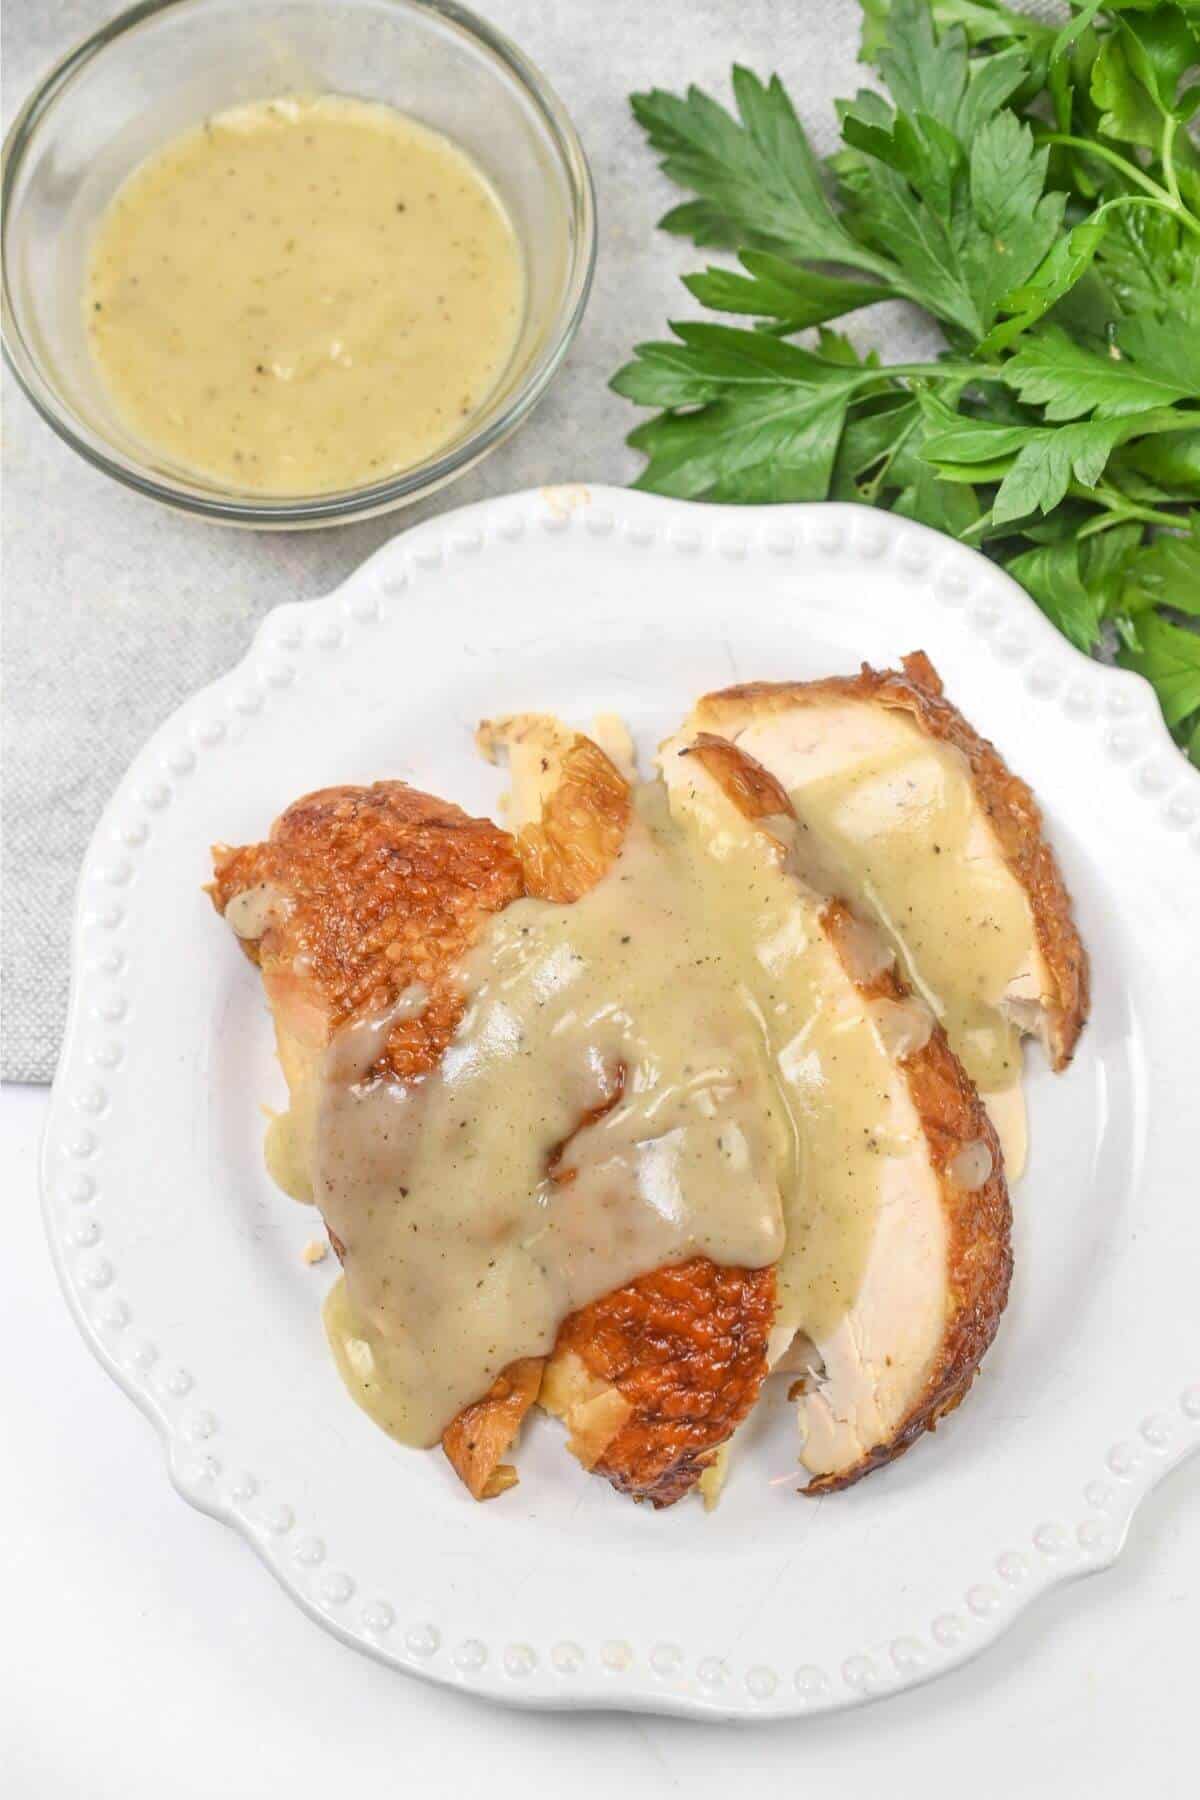 Chicken breast with gravy and parsley on a white plate.